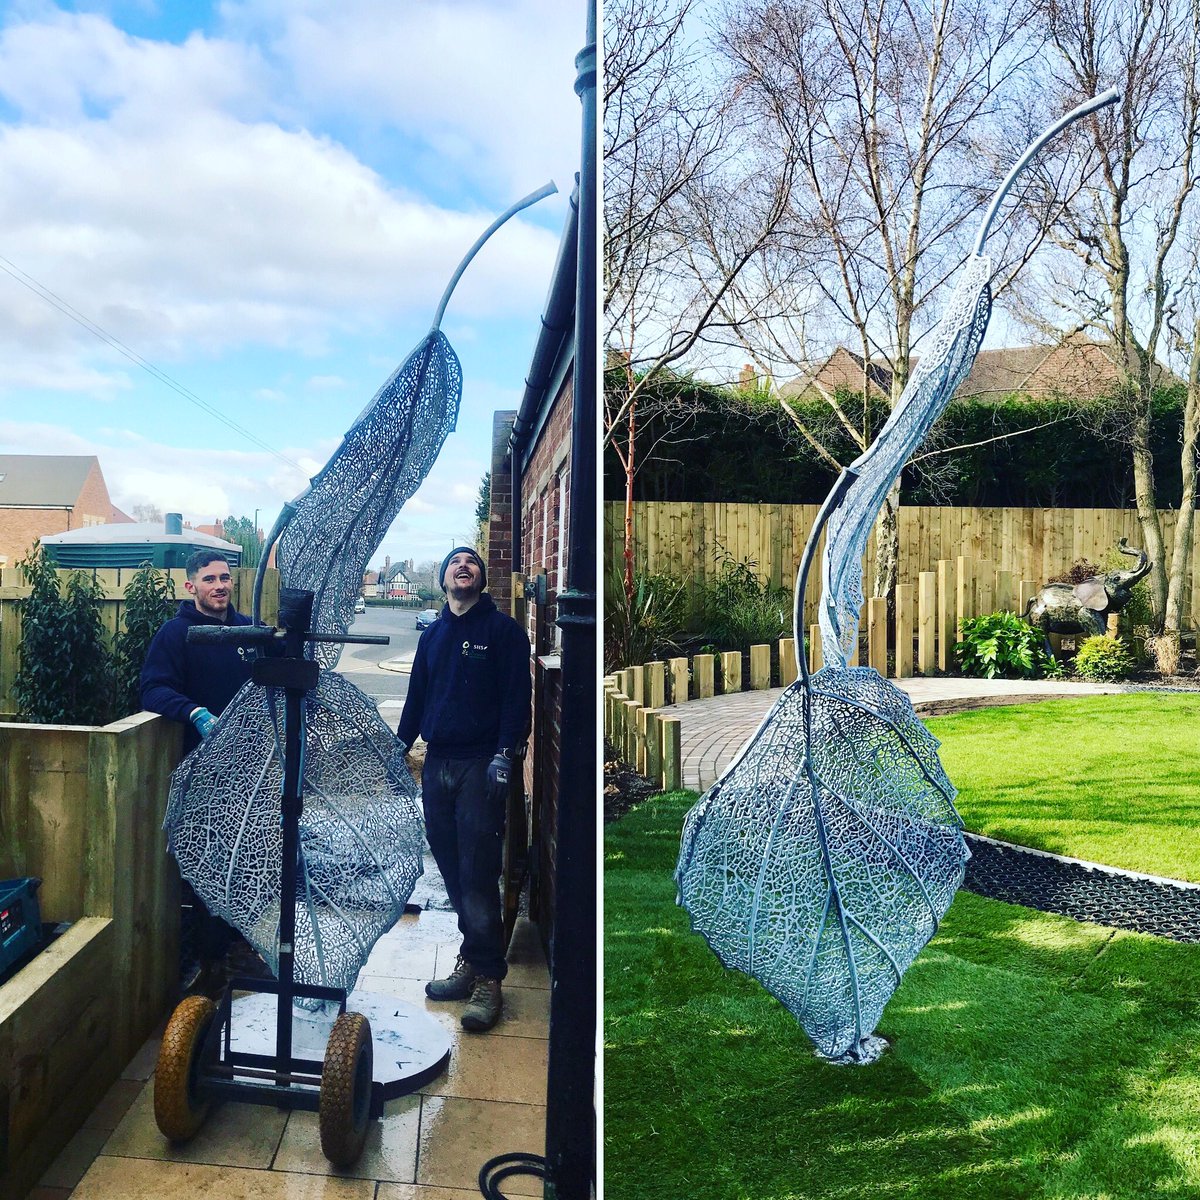 Sneak peek at our latest #Gosforth #Newcastle #garden Touch & go getting the 'Falling Leafs' #sculpture into the garden! Now in place, turf down & framing 'Elly' in the border - the garden is really coming together! A bit more work before totally finished but won't be long 🍃😉